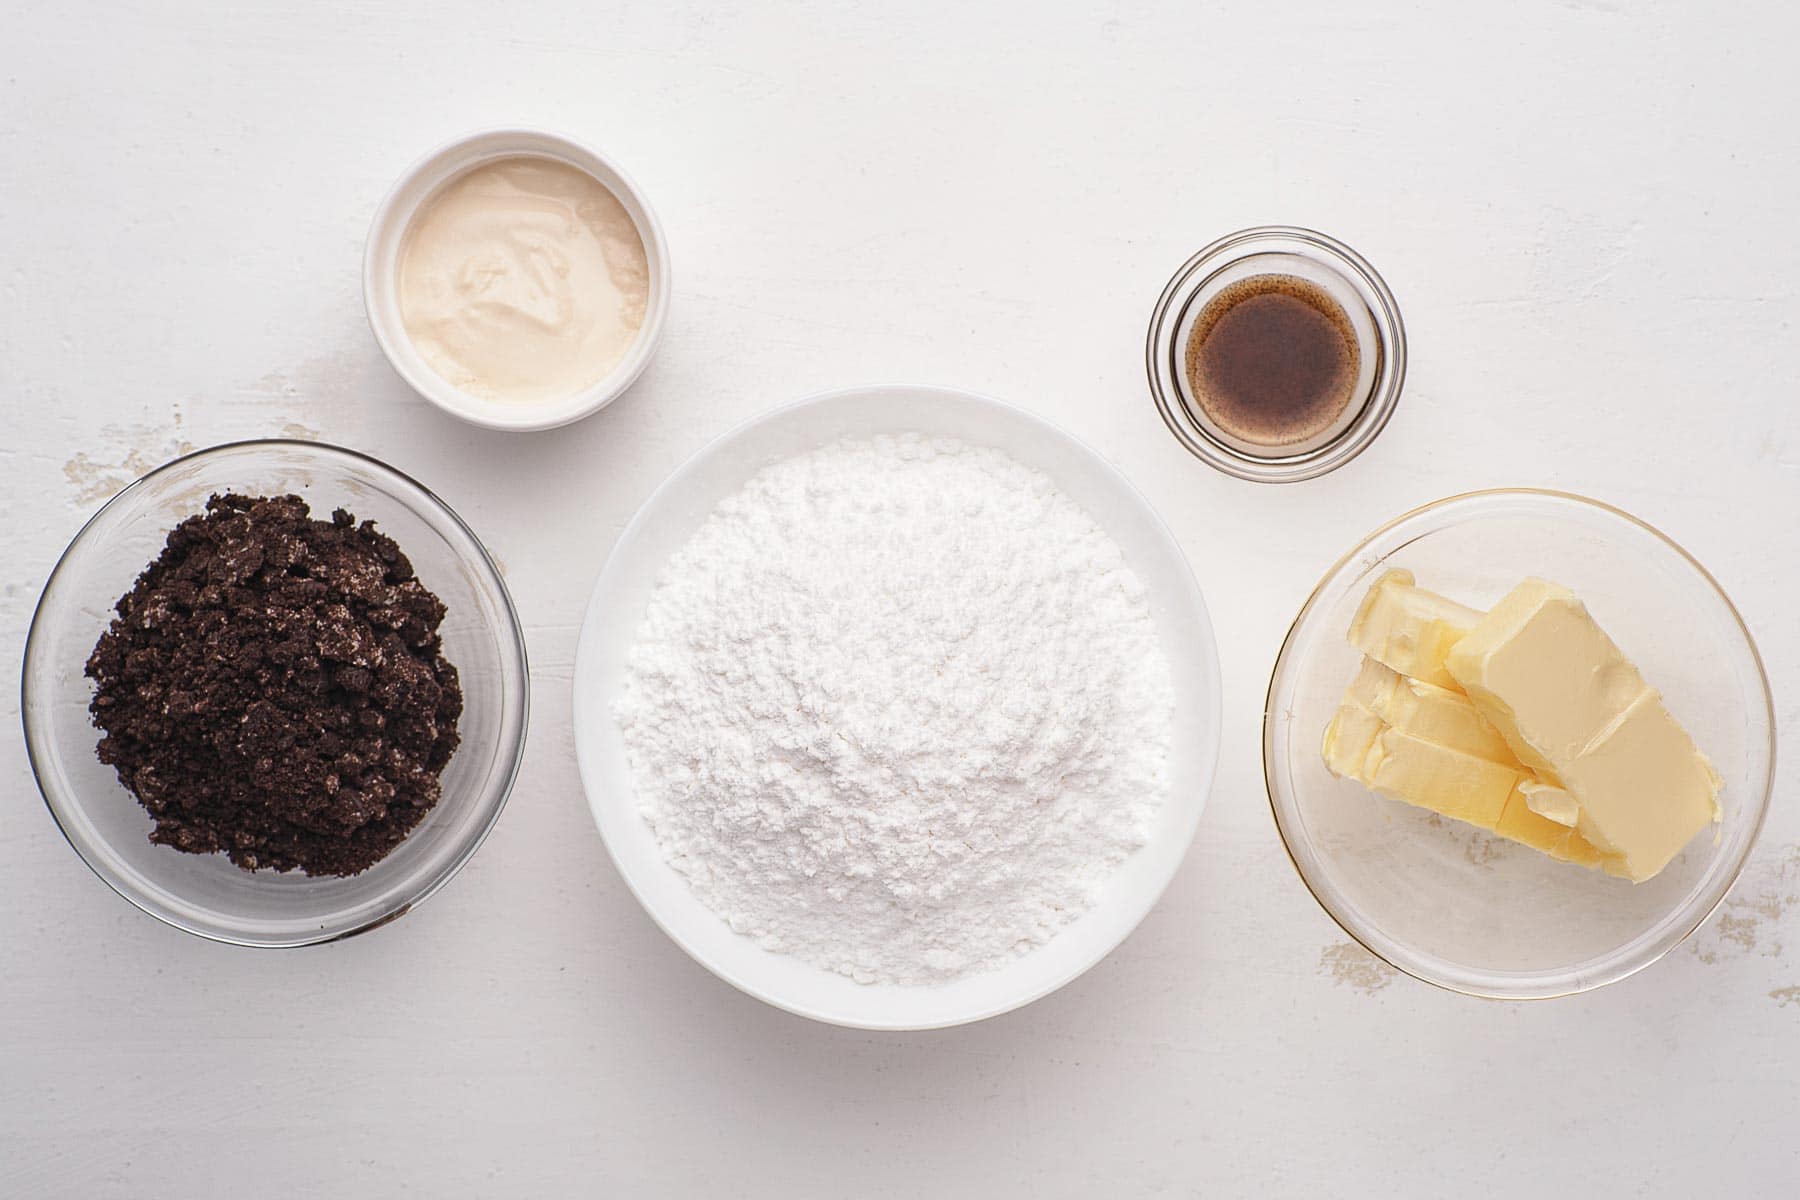 Ingredients for cookies and cream frosting in small bowls.